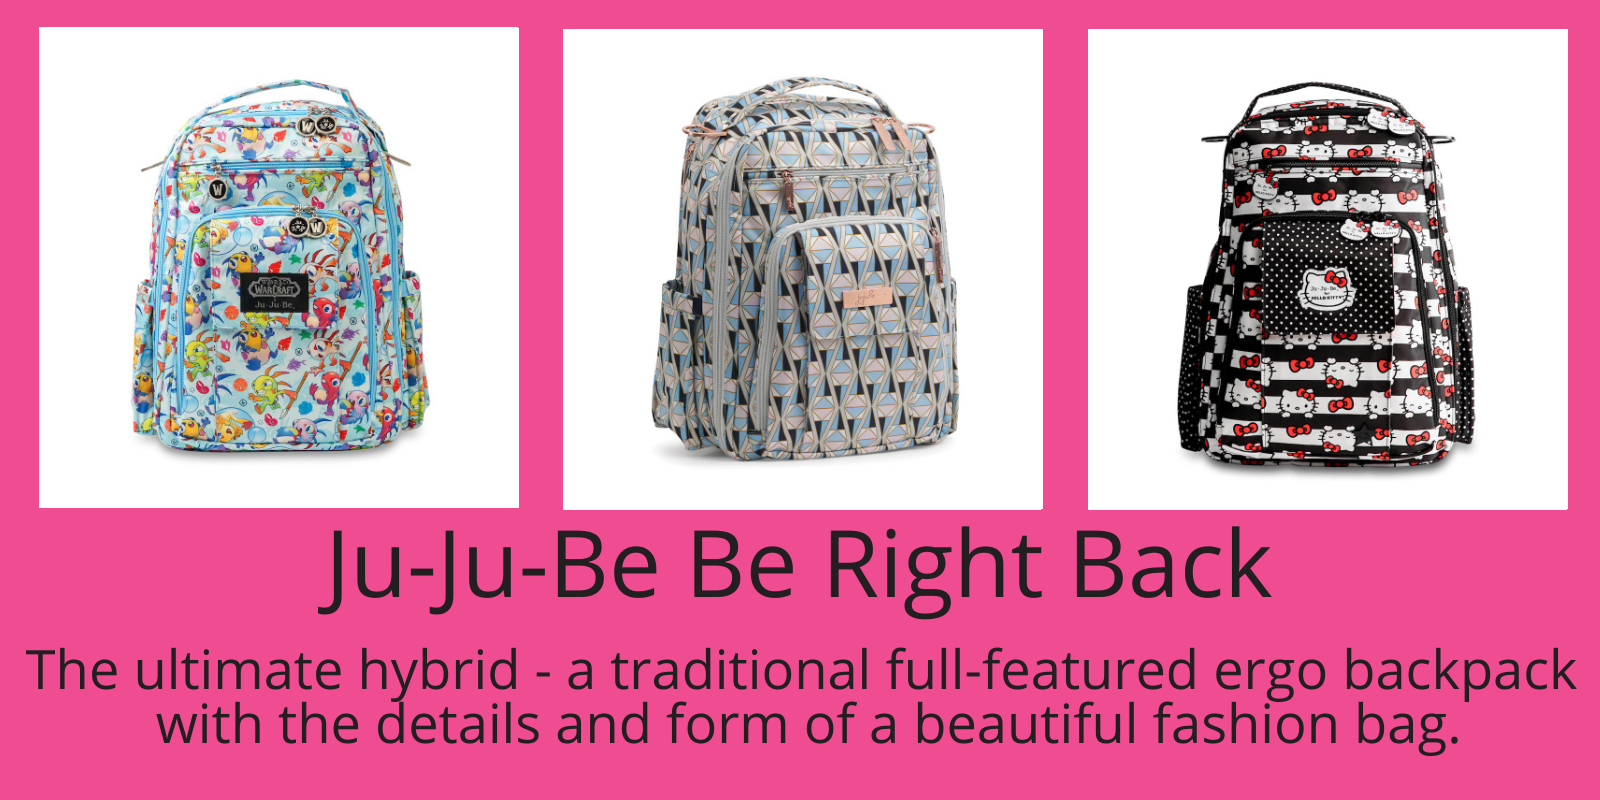 The Be Right Back - A Great Diaper Bag for the Whole Family!